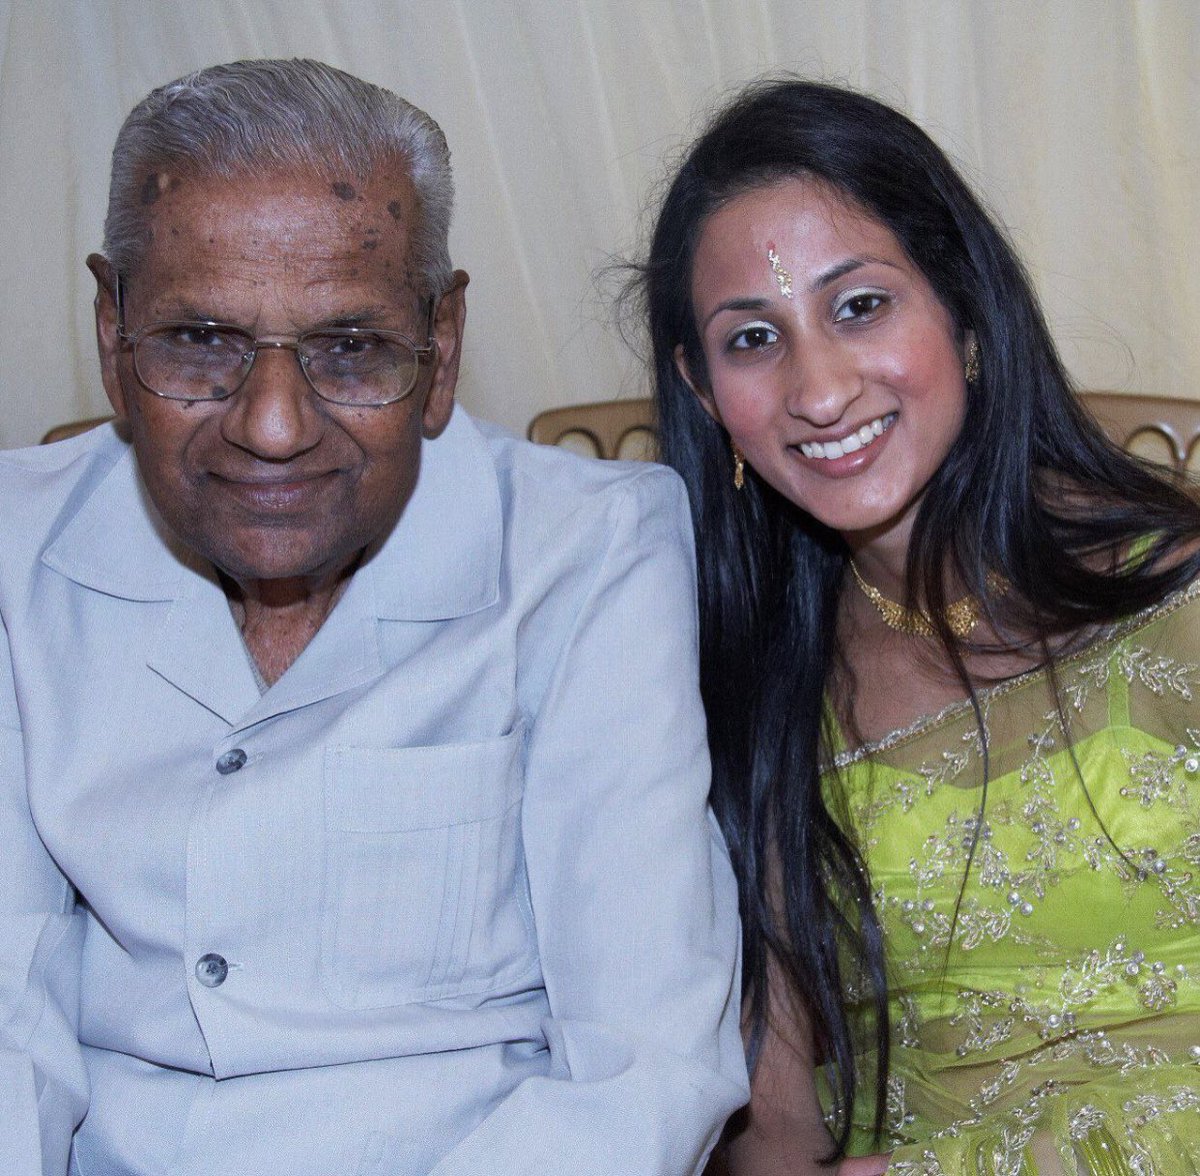 #SouthAsianHeritageMonth #StoriesToTell My favourite stories were the ones my Grandparents told me. About their lives & the journey from villages in India to living in Kenya &then UK. Sharing their struggles and their happy times! It has defined who I am today!